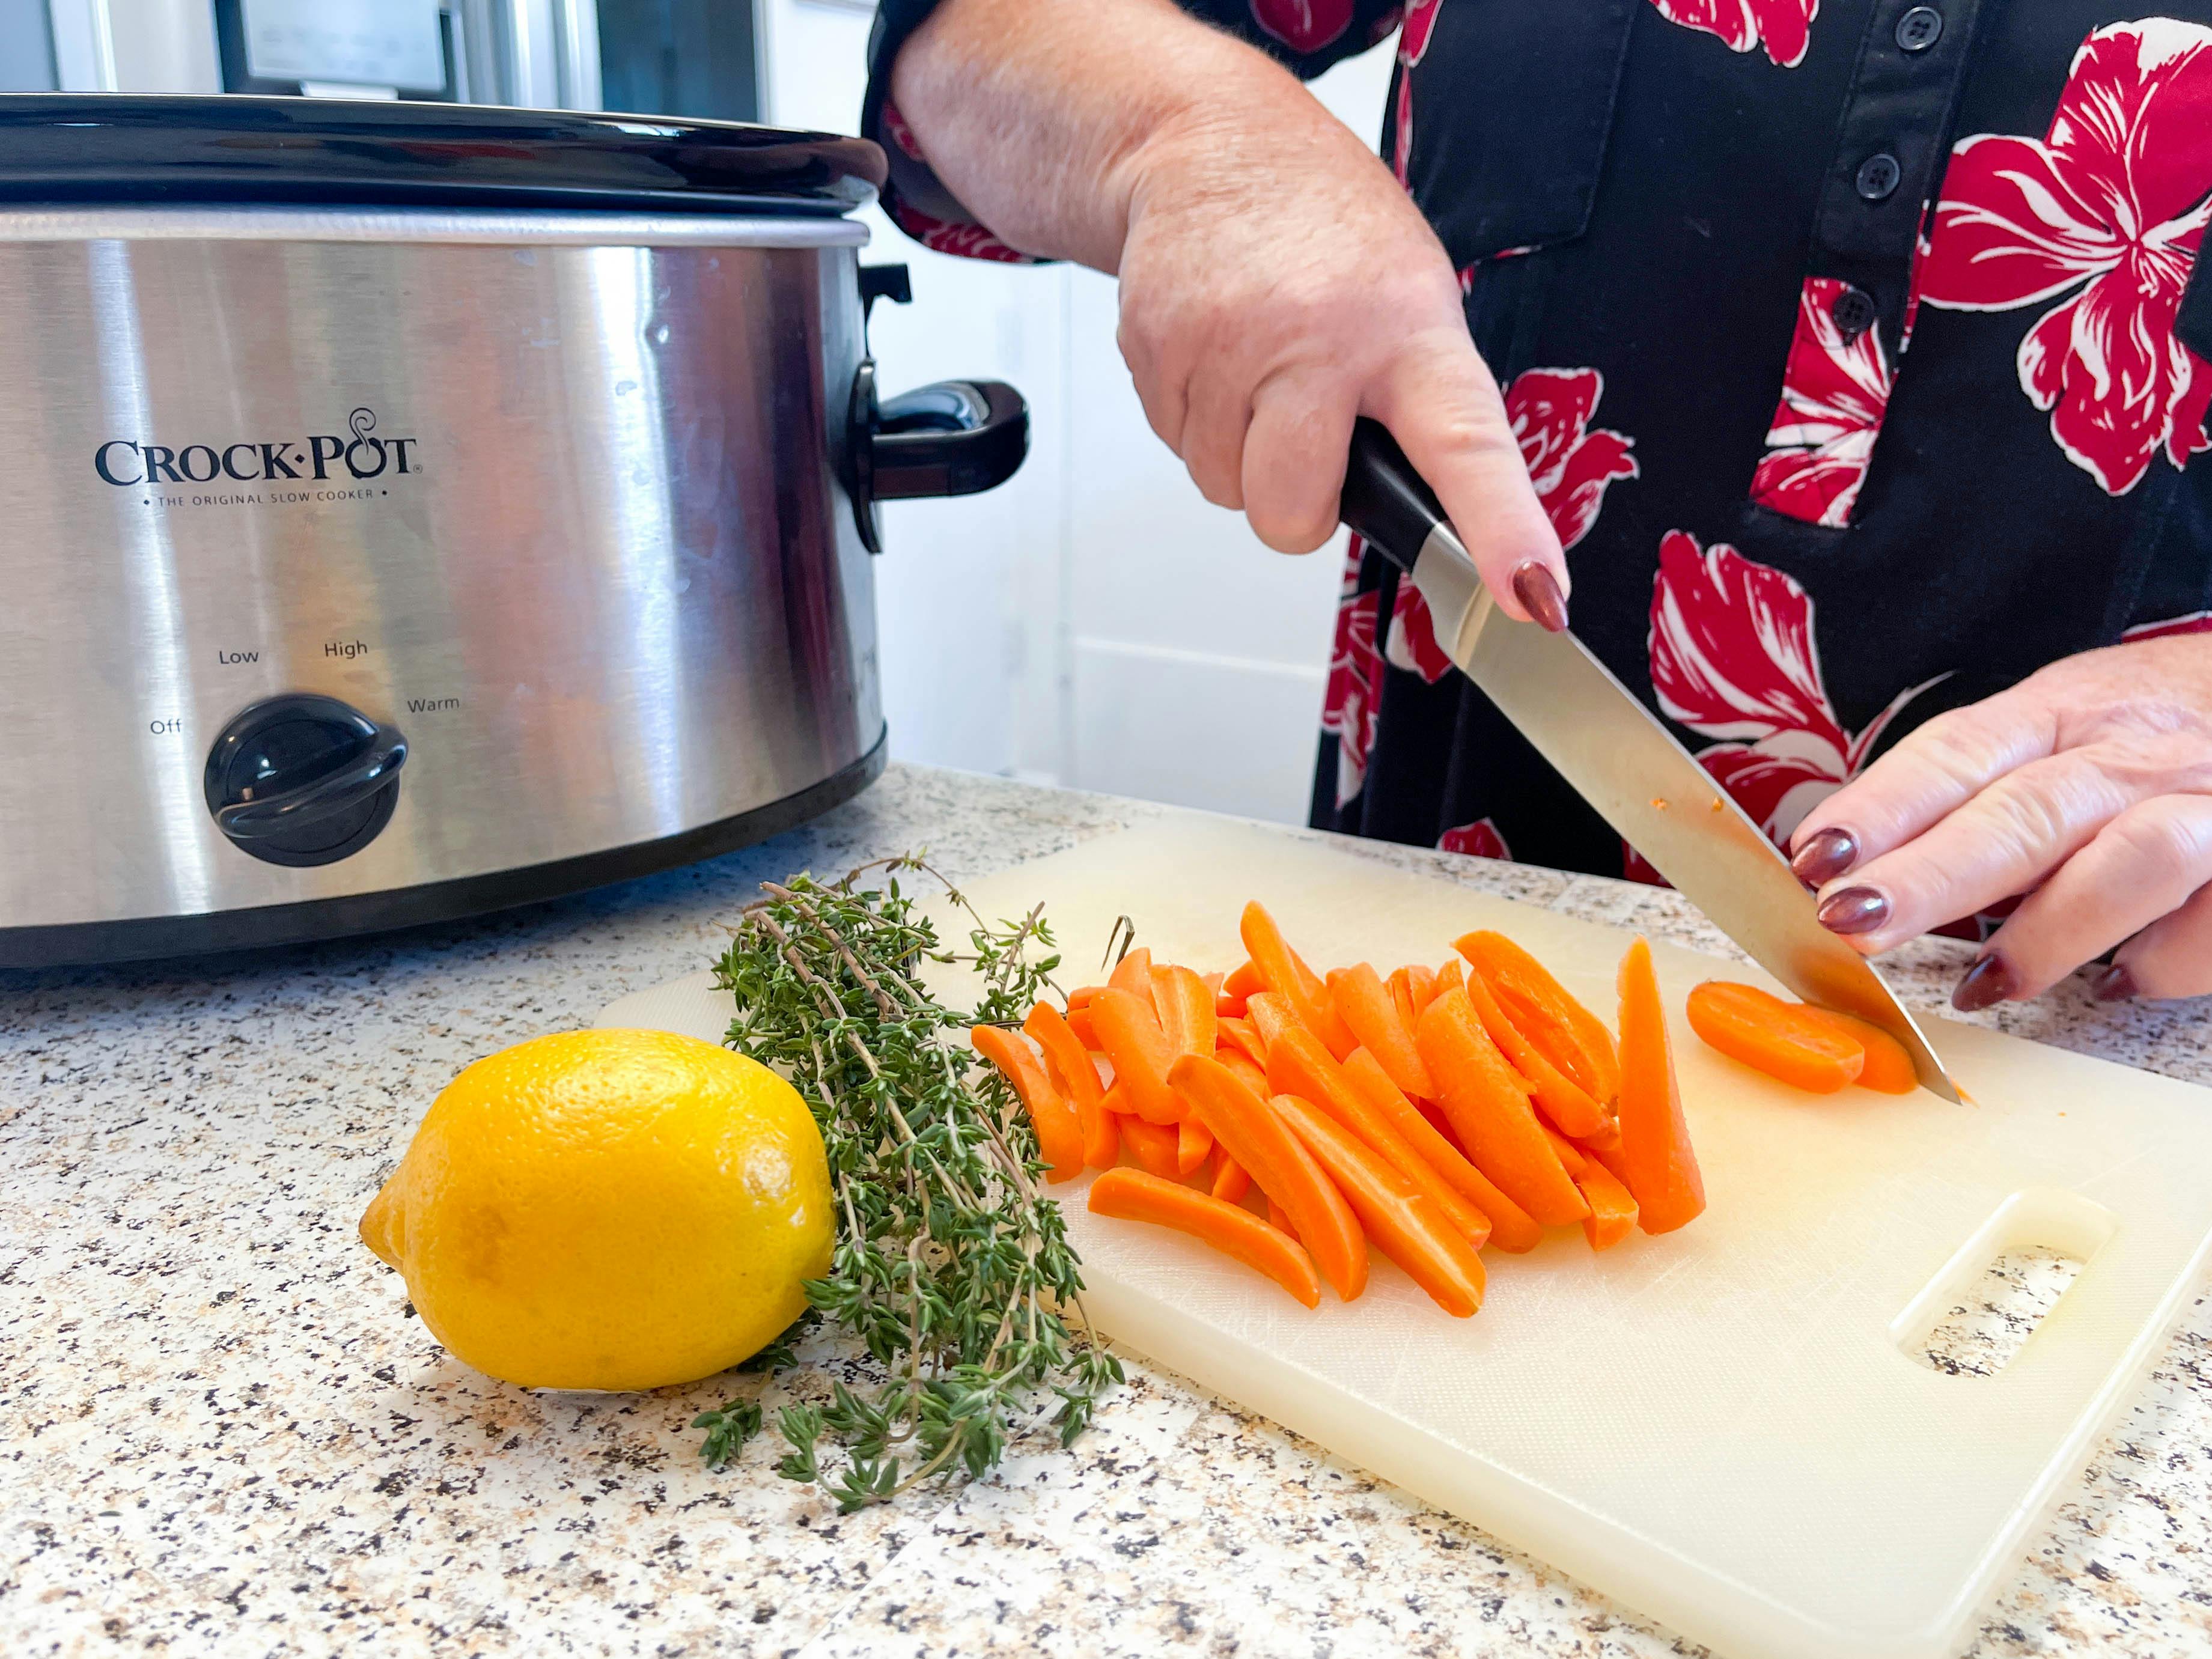 a woman cutting up carrots for lemon thyme carrots in front of a crock pot.